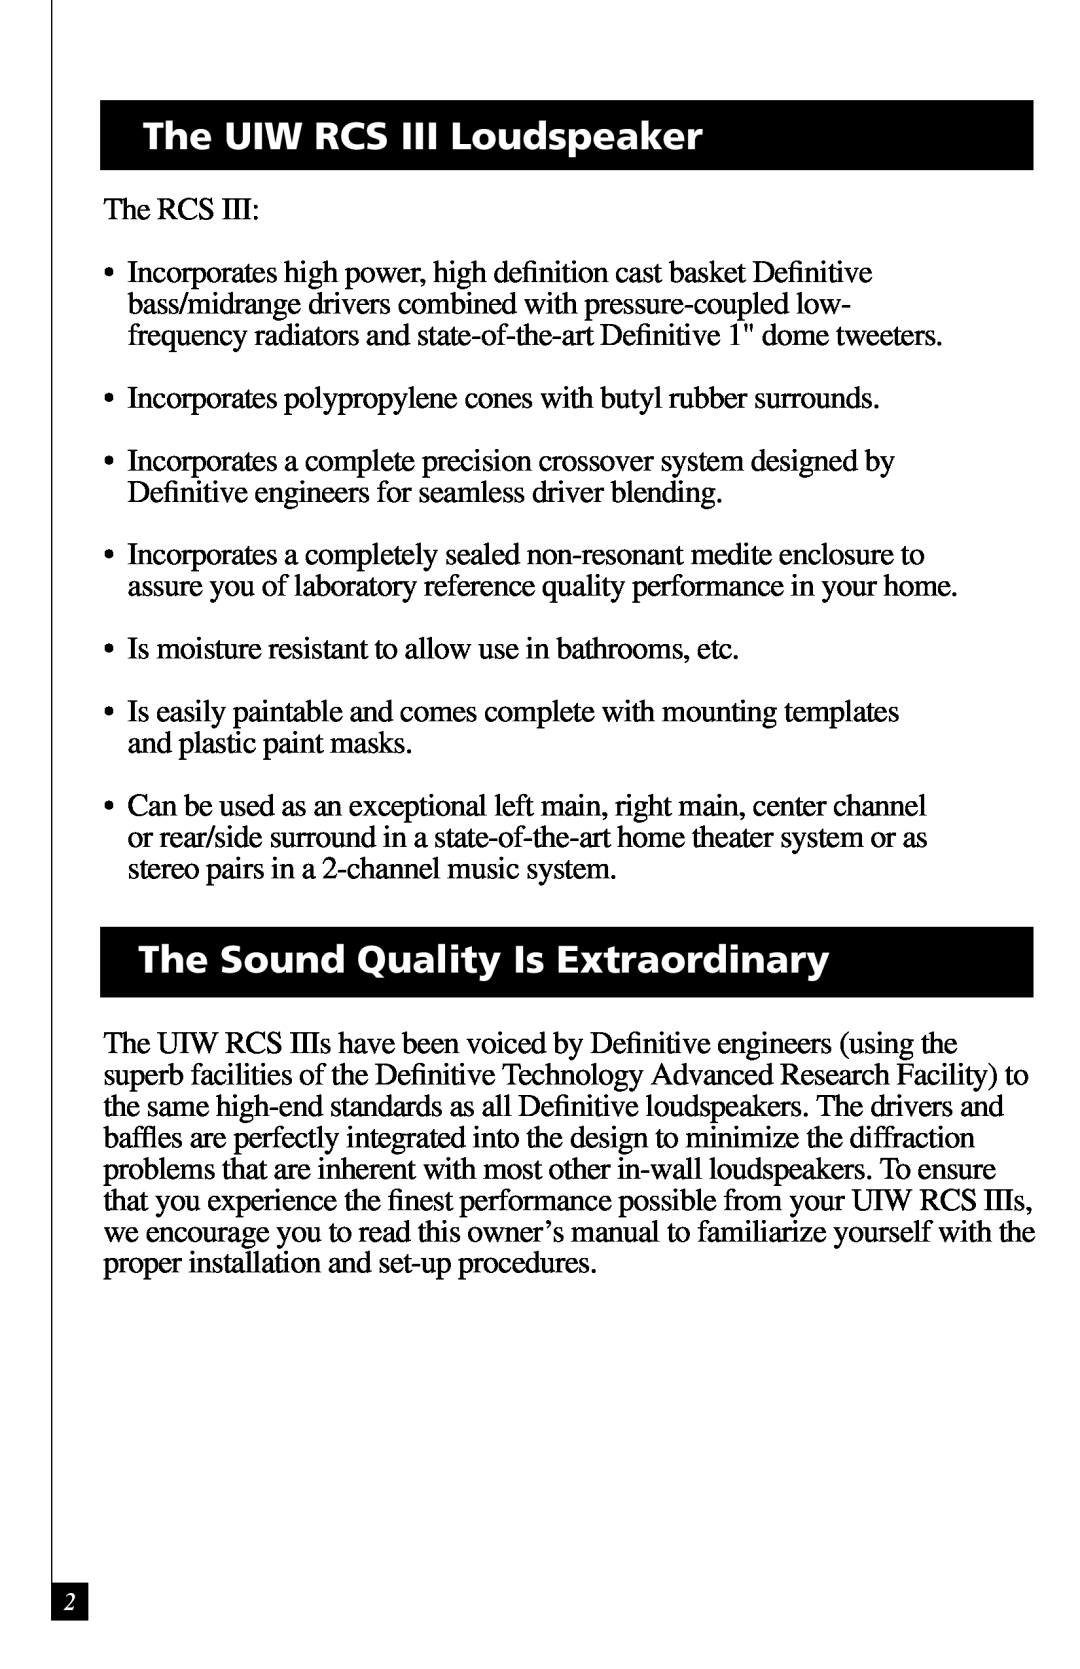 Definitive Technology owner manual The UIW RCS III Loudspeaker, The Sound Quality Is Extraordinary 